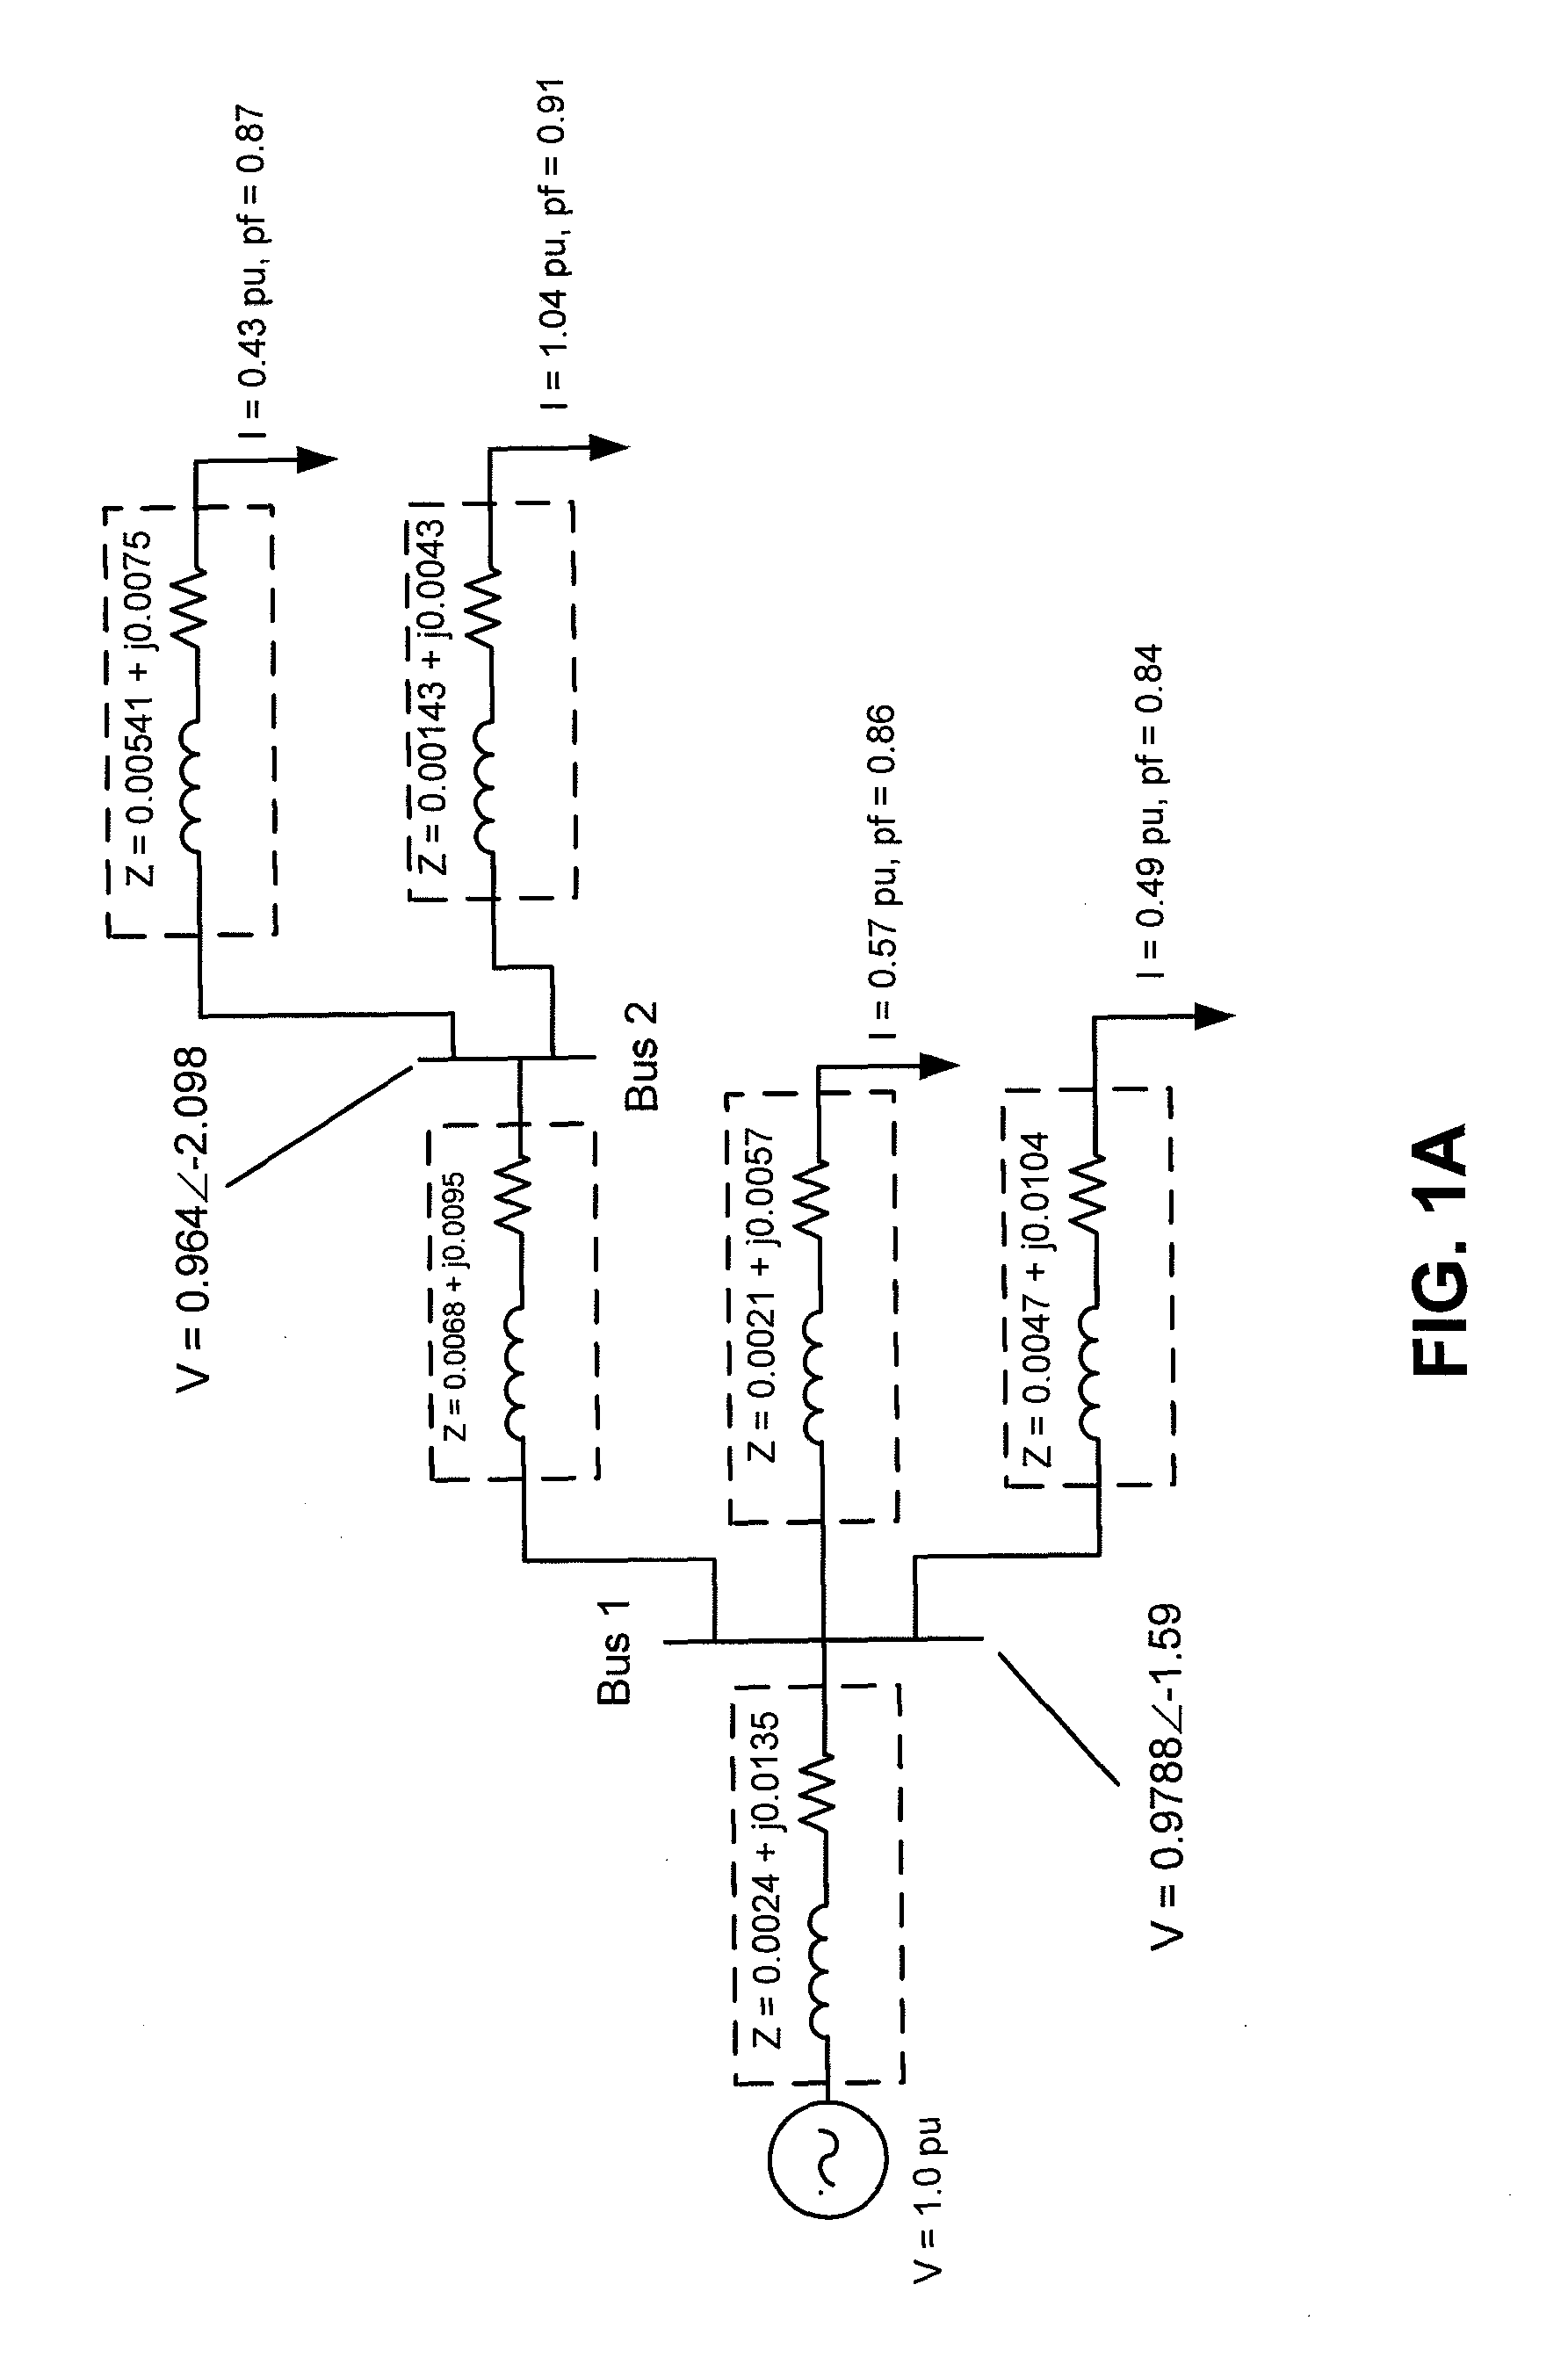 Impedance-based arc fault determination device (IADD) and method